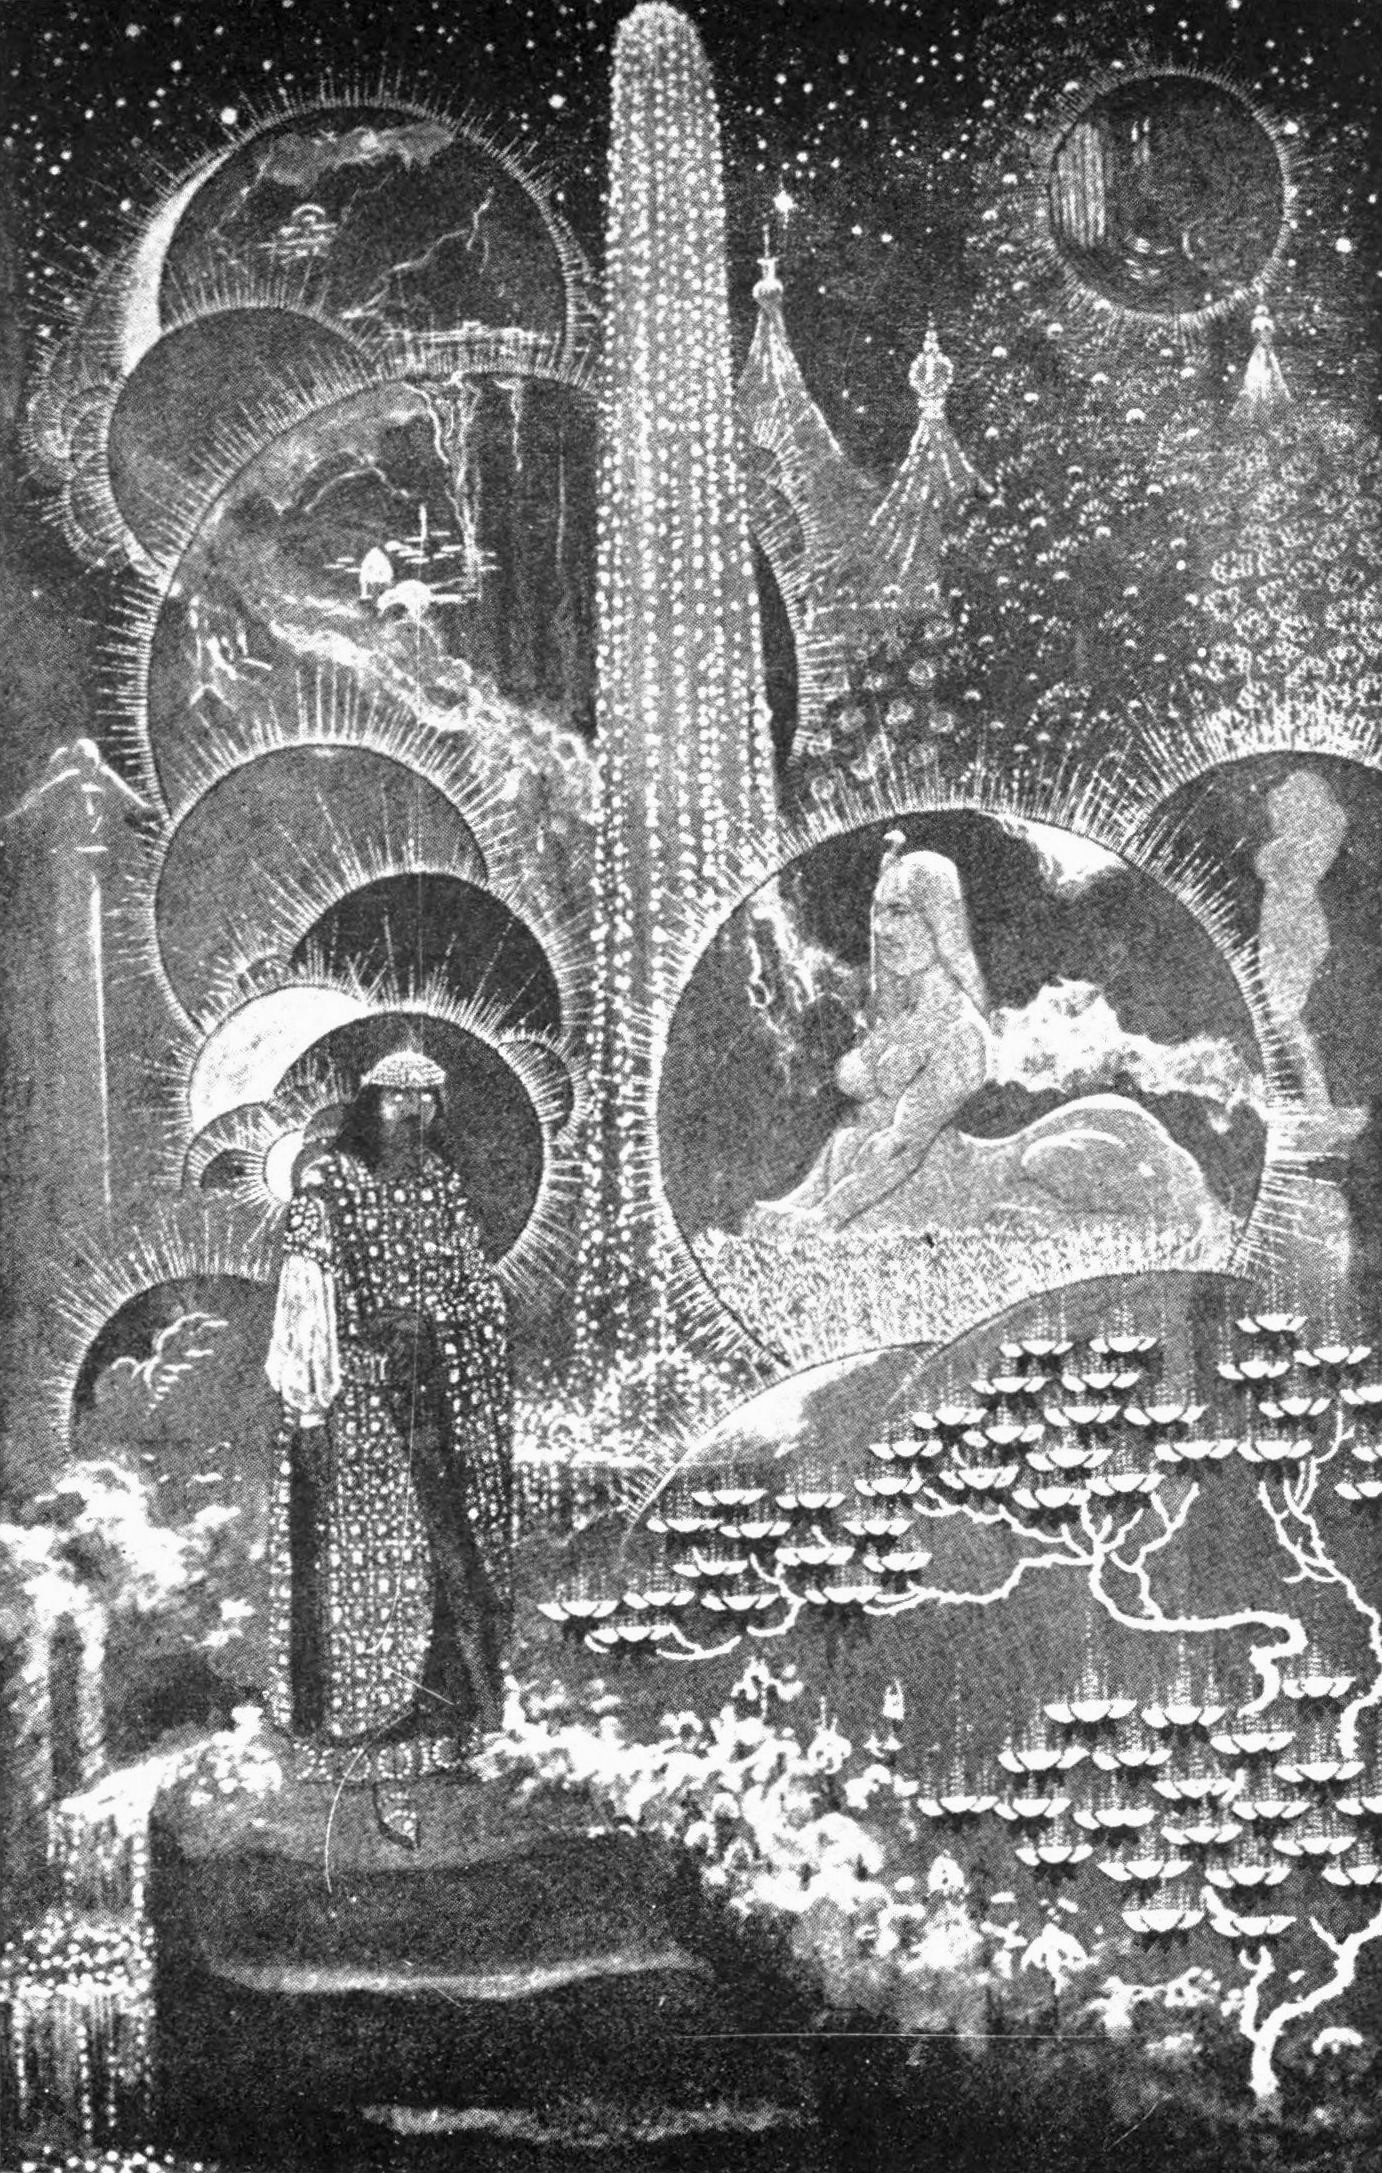 A man with a glowing crown stands in the foreground. Behind him is a sphinxlike creature and various geometric patterns, some in the shape of planets against the stars.